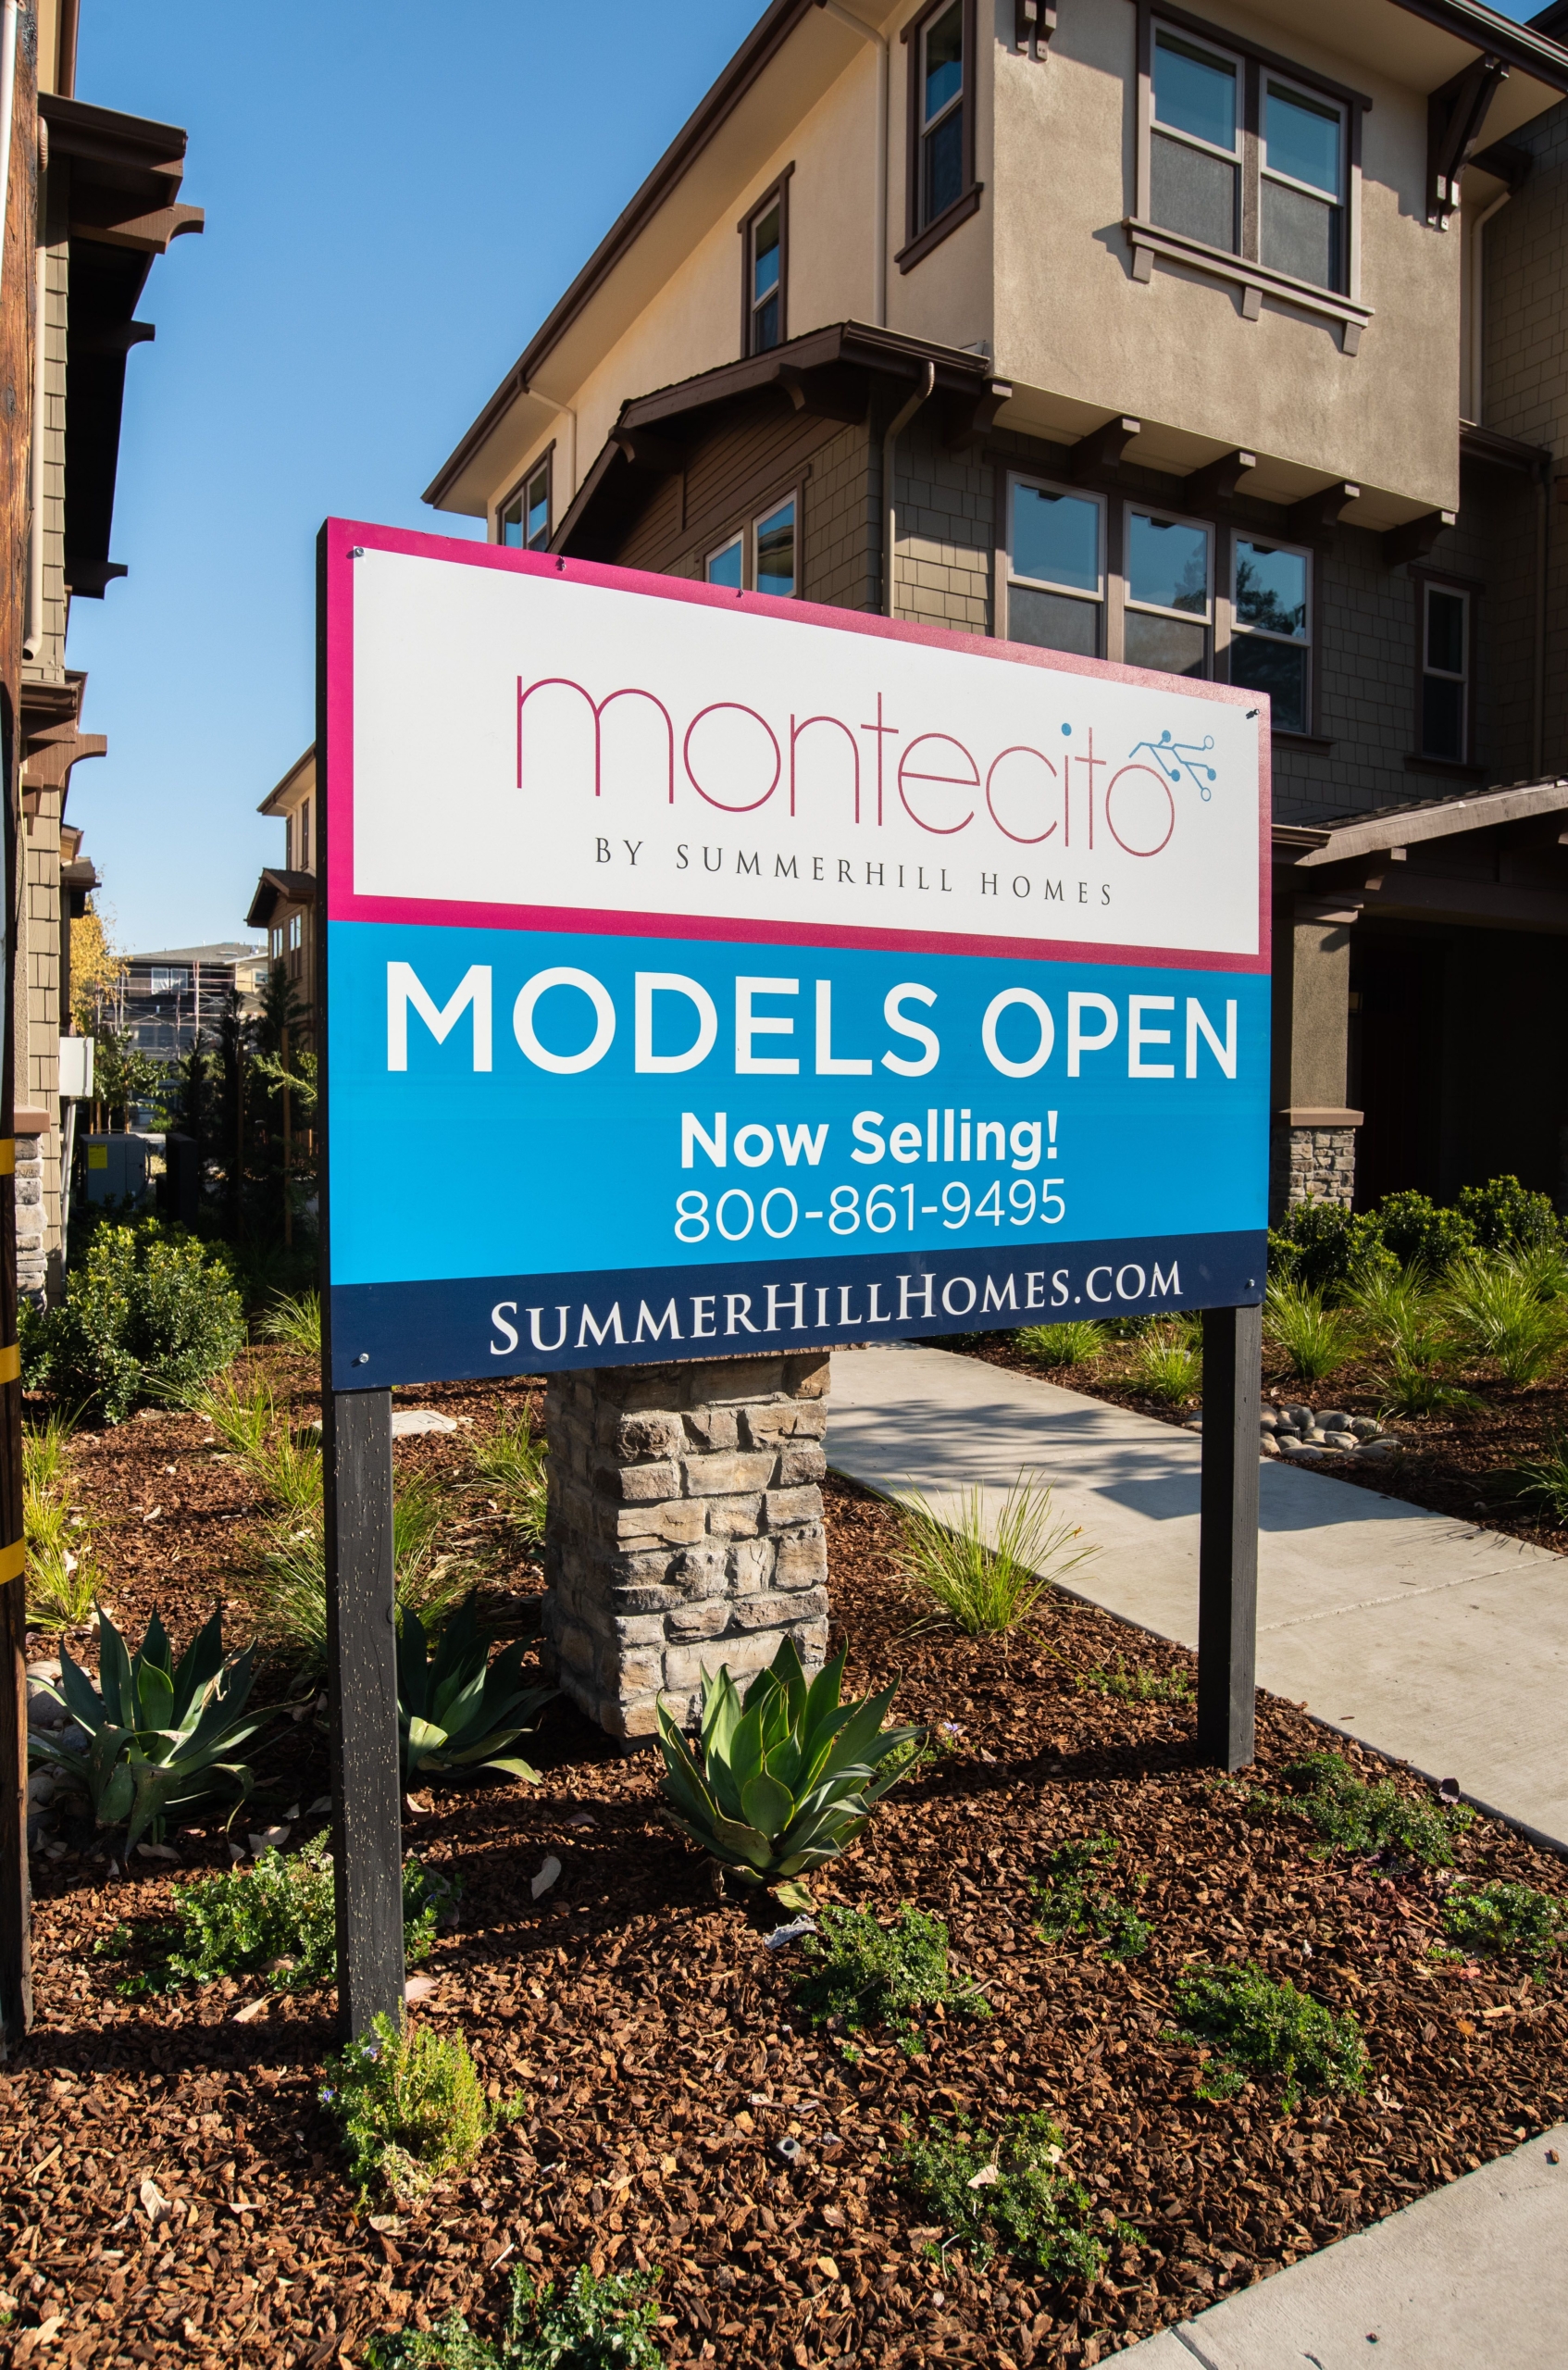 Montecito by Summerhill Homes Signage 7